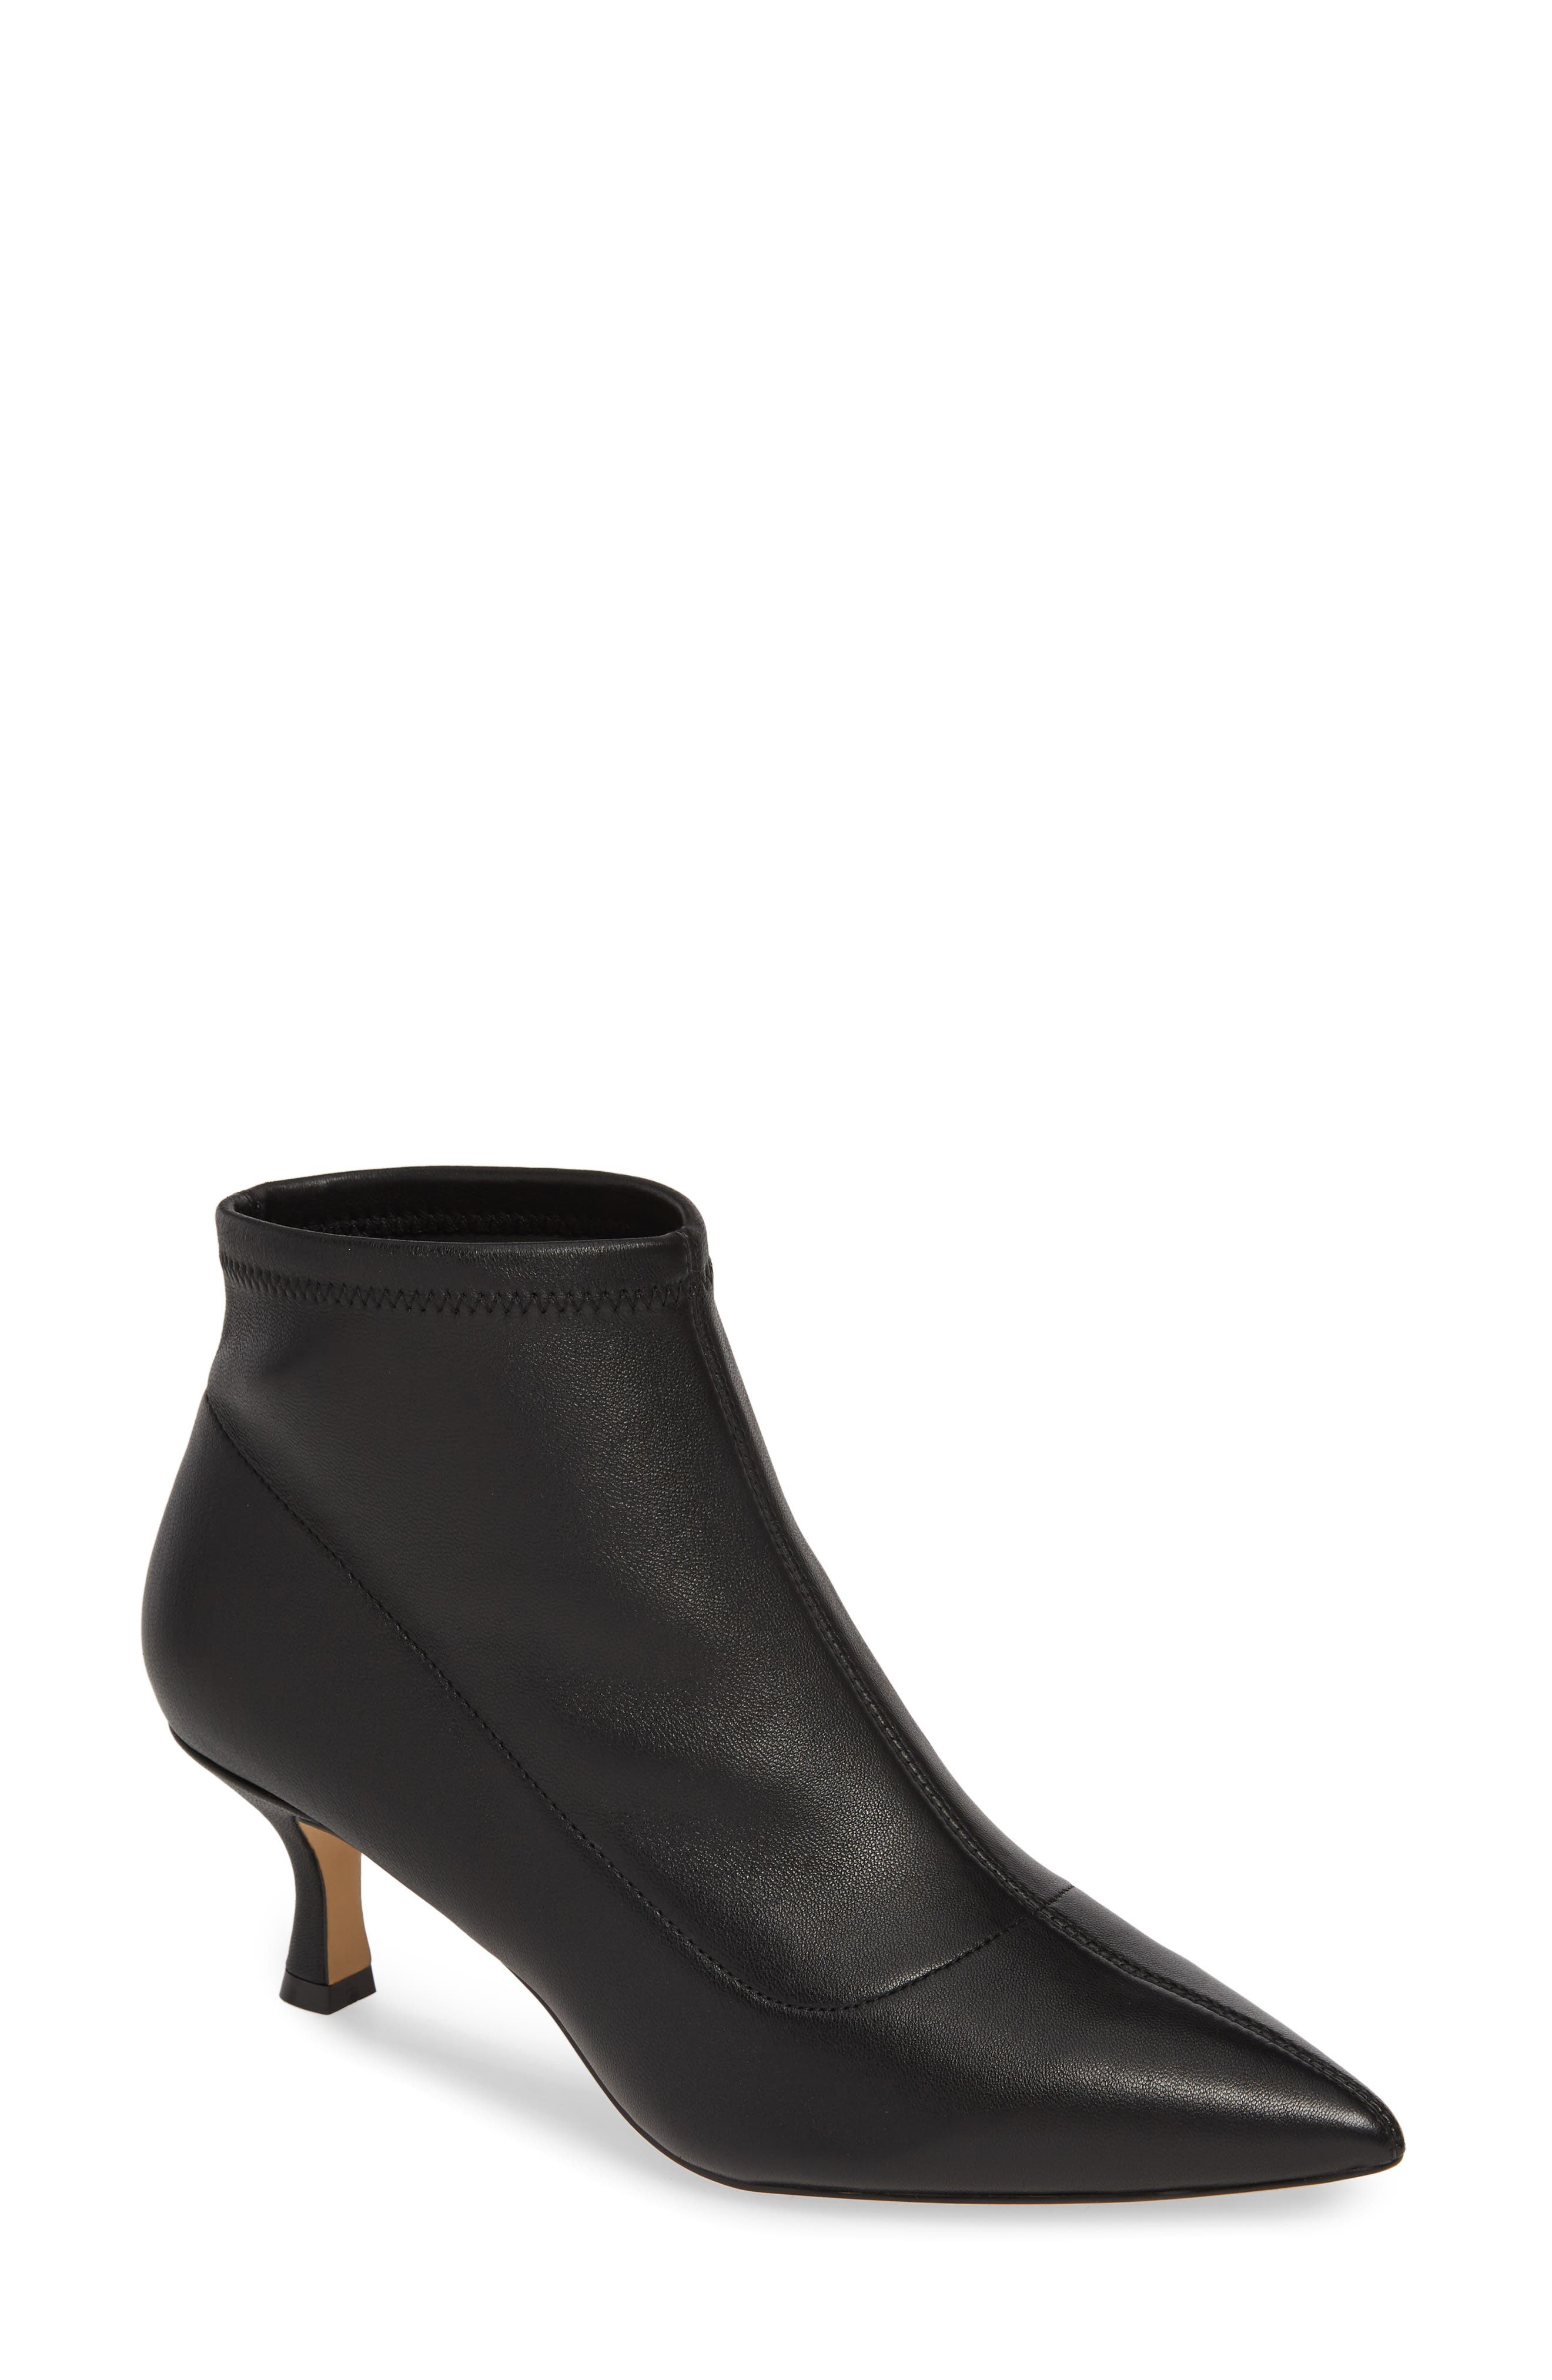 ankle boots for work